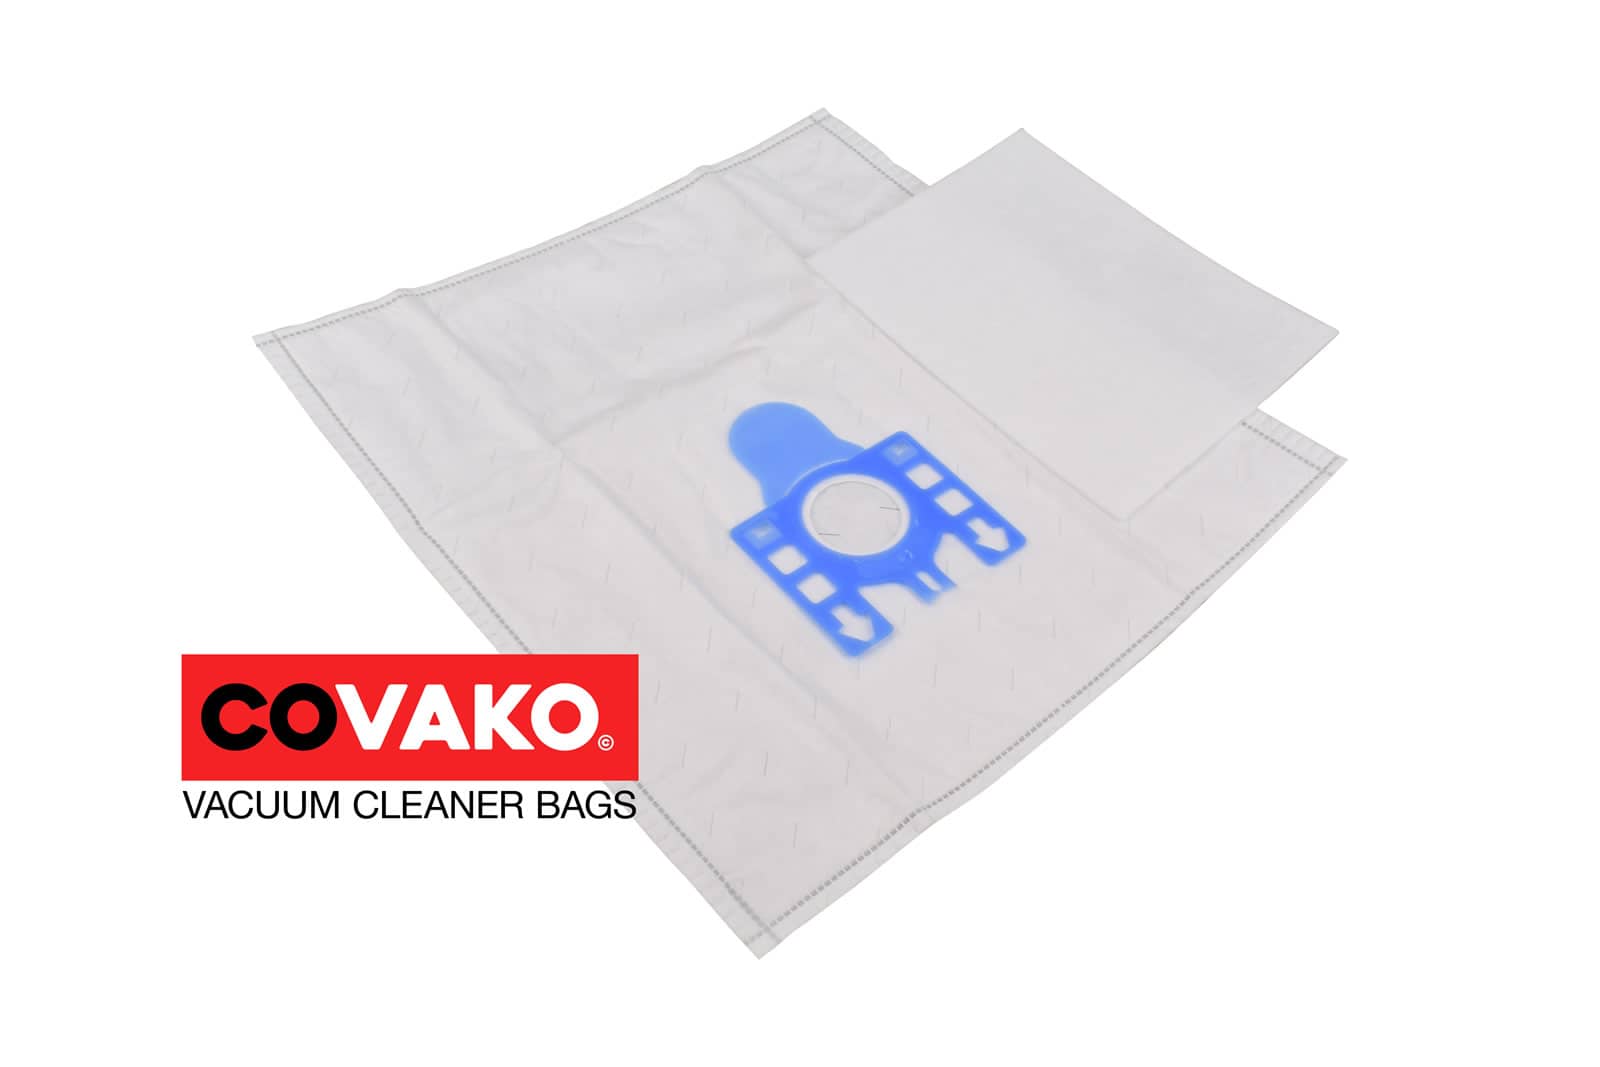 Electrolux CE 1400 Energiesparer / Synthesis - Electrolux vacuum cleaner bags